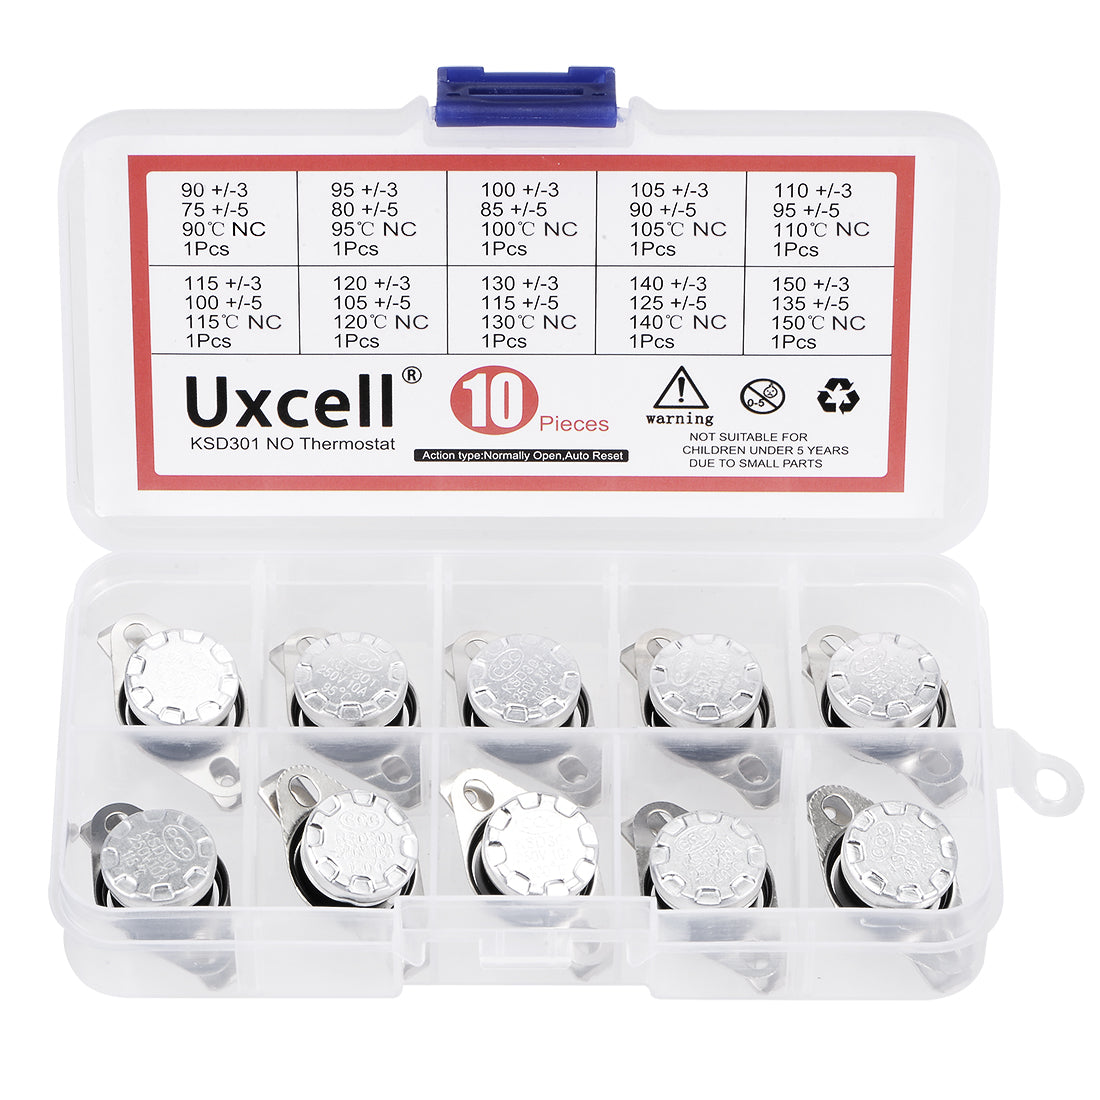 uxcell Uxcell 10pcs NC KSD301 Thermostat 90-150°C(194-302℉) Temperature Thermal Control Switch 90 95 100 105 110 115 120 130 140 150°C Normally Close Assortment Kit